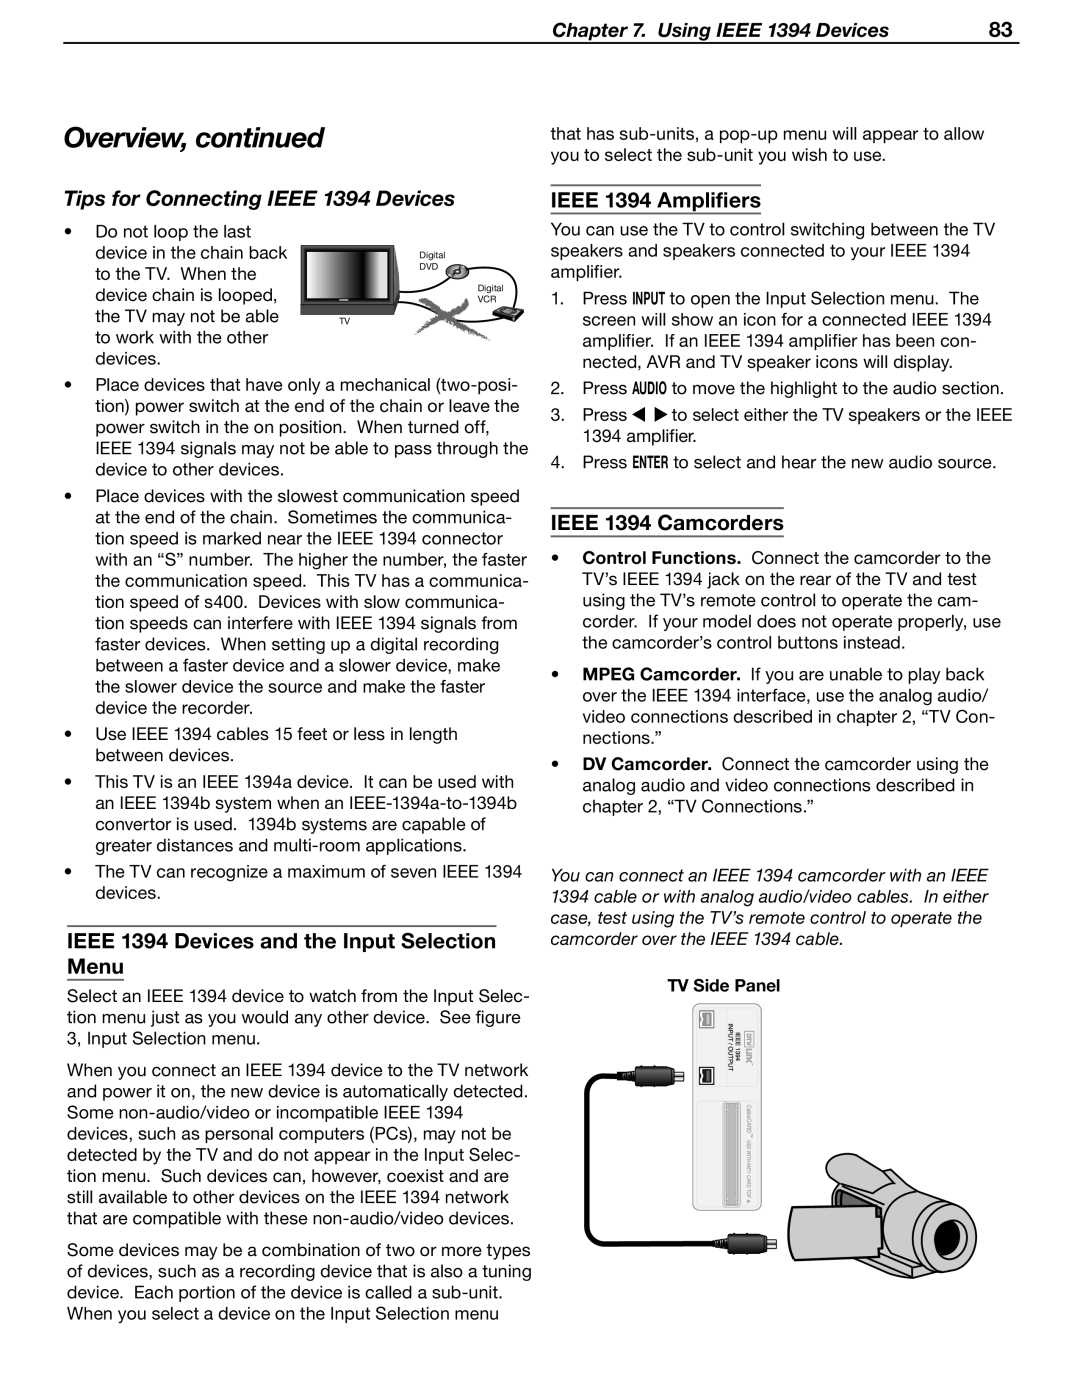 Mitsubishi Electronics LT-37131 manual Overview, continued, Tips for Connecting IEEE 1394 Devices, IEEE 1394 Amplifiers 